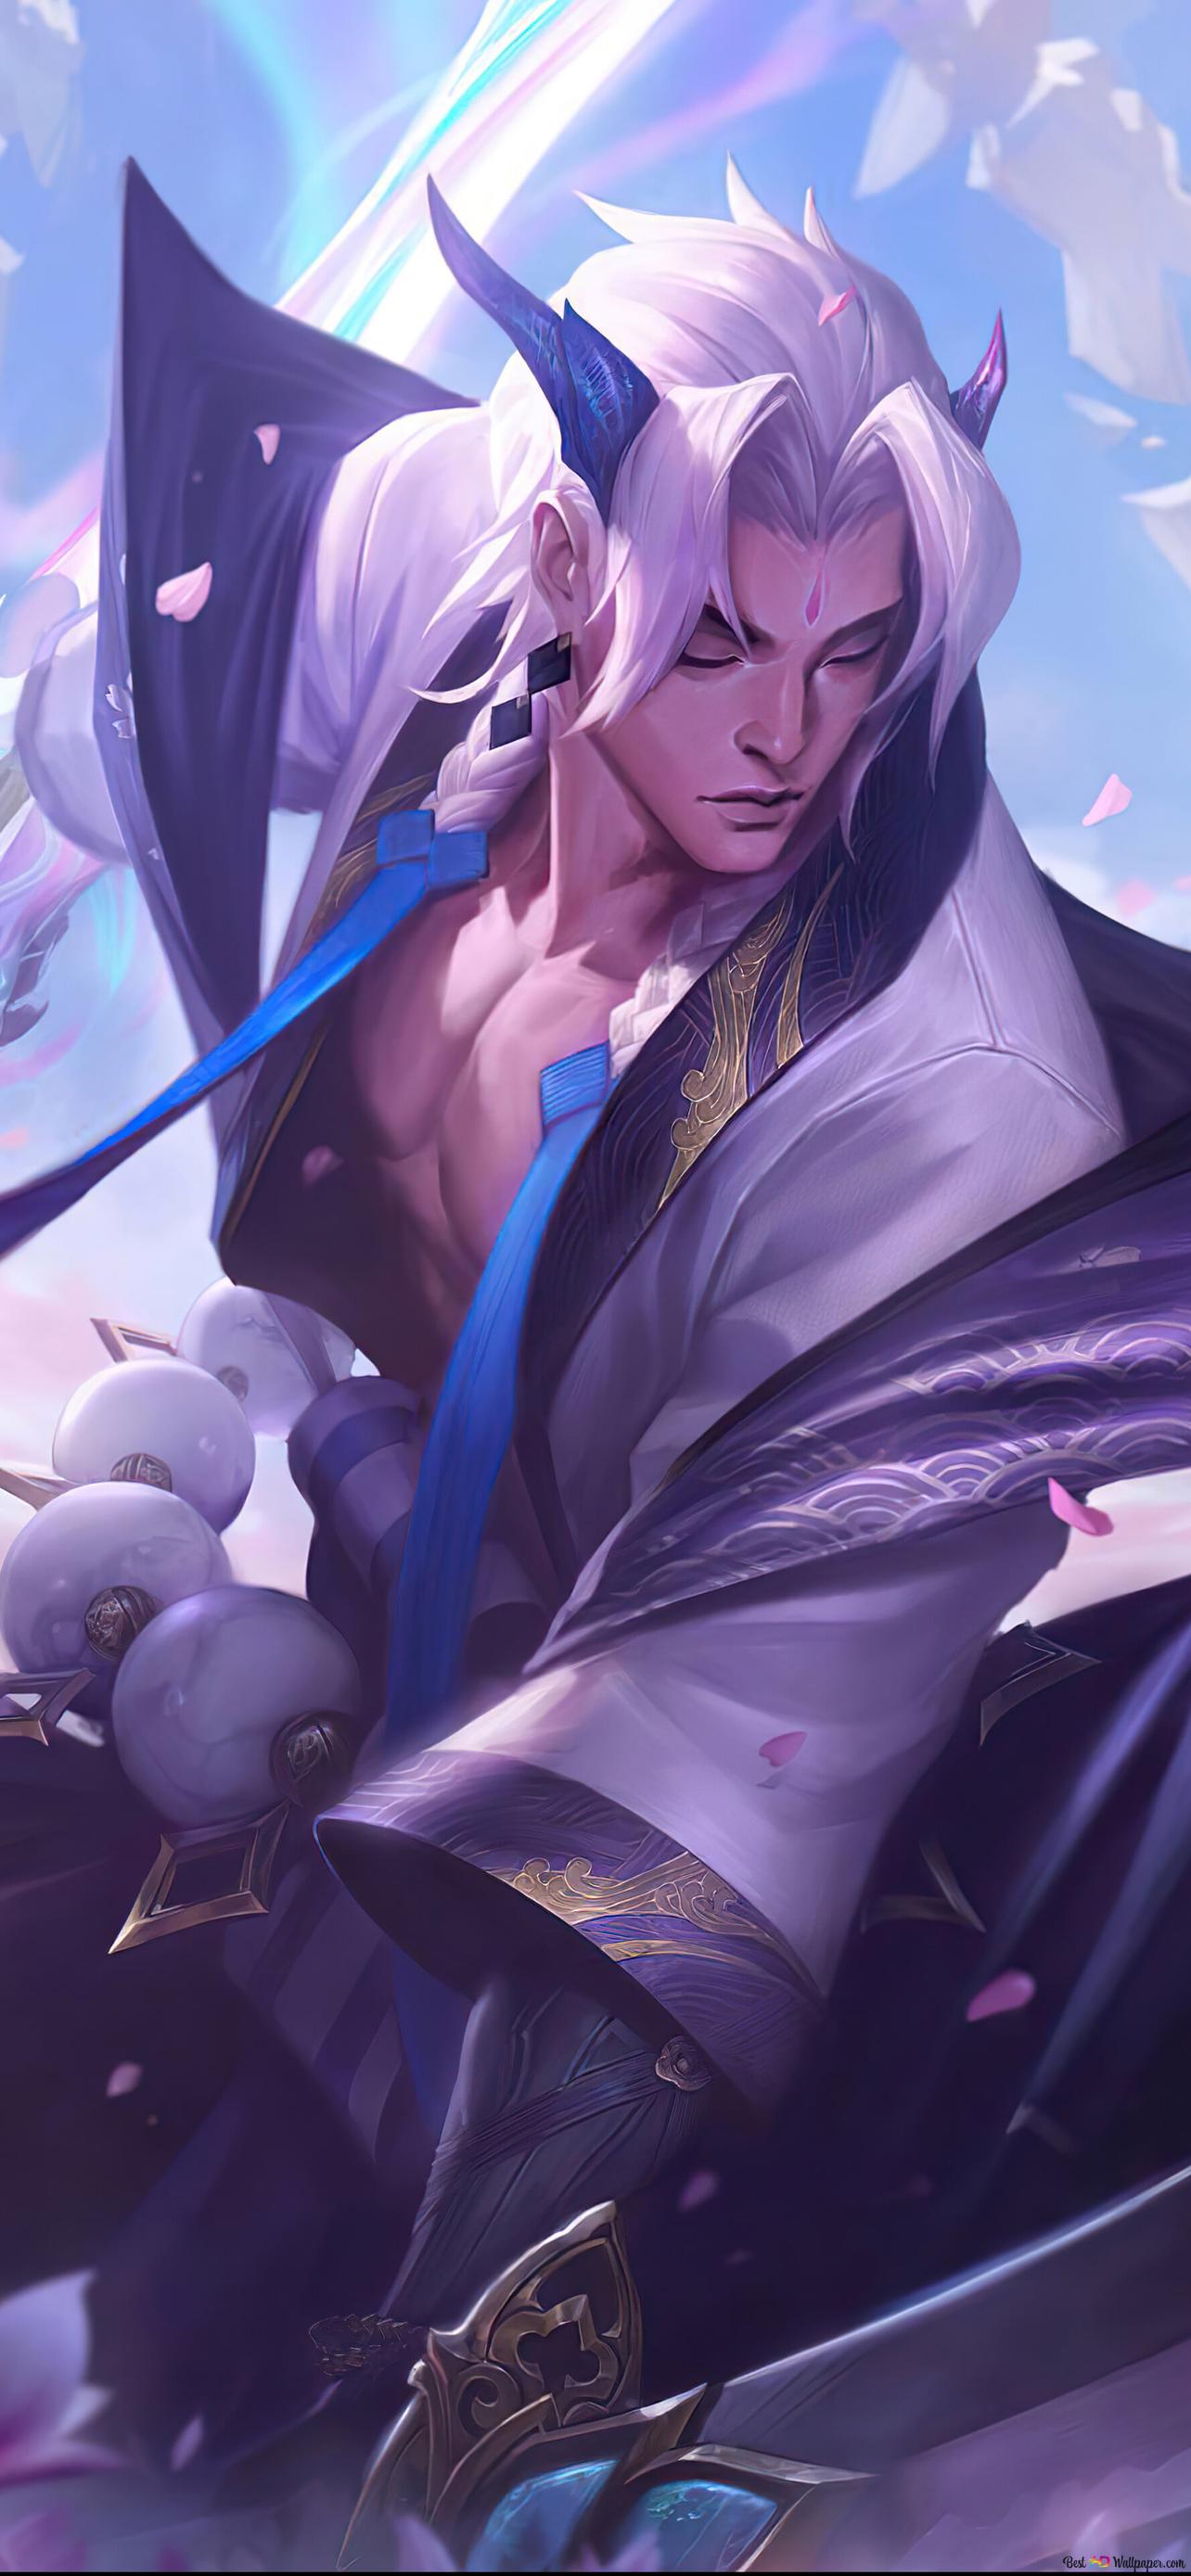 Male anime character from spirit blossom series with white hair in purple outfit k wallpaper download